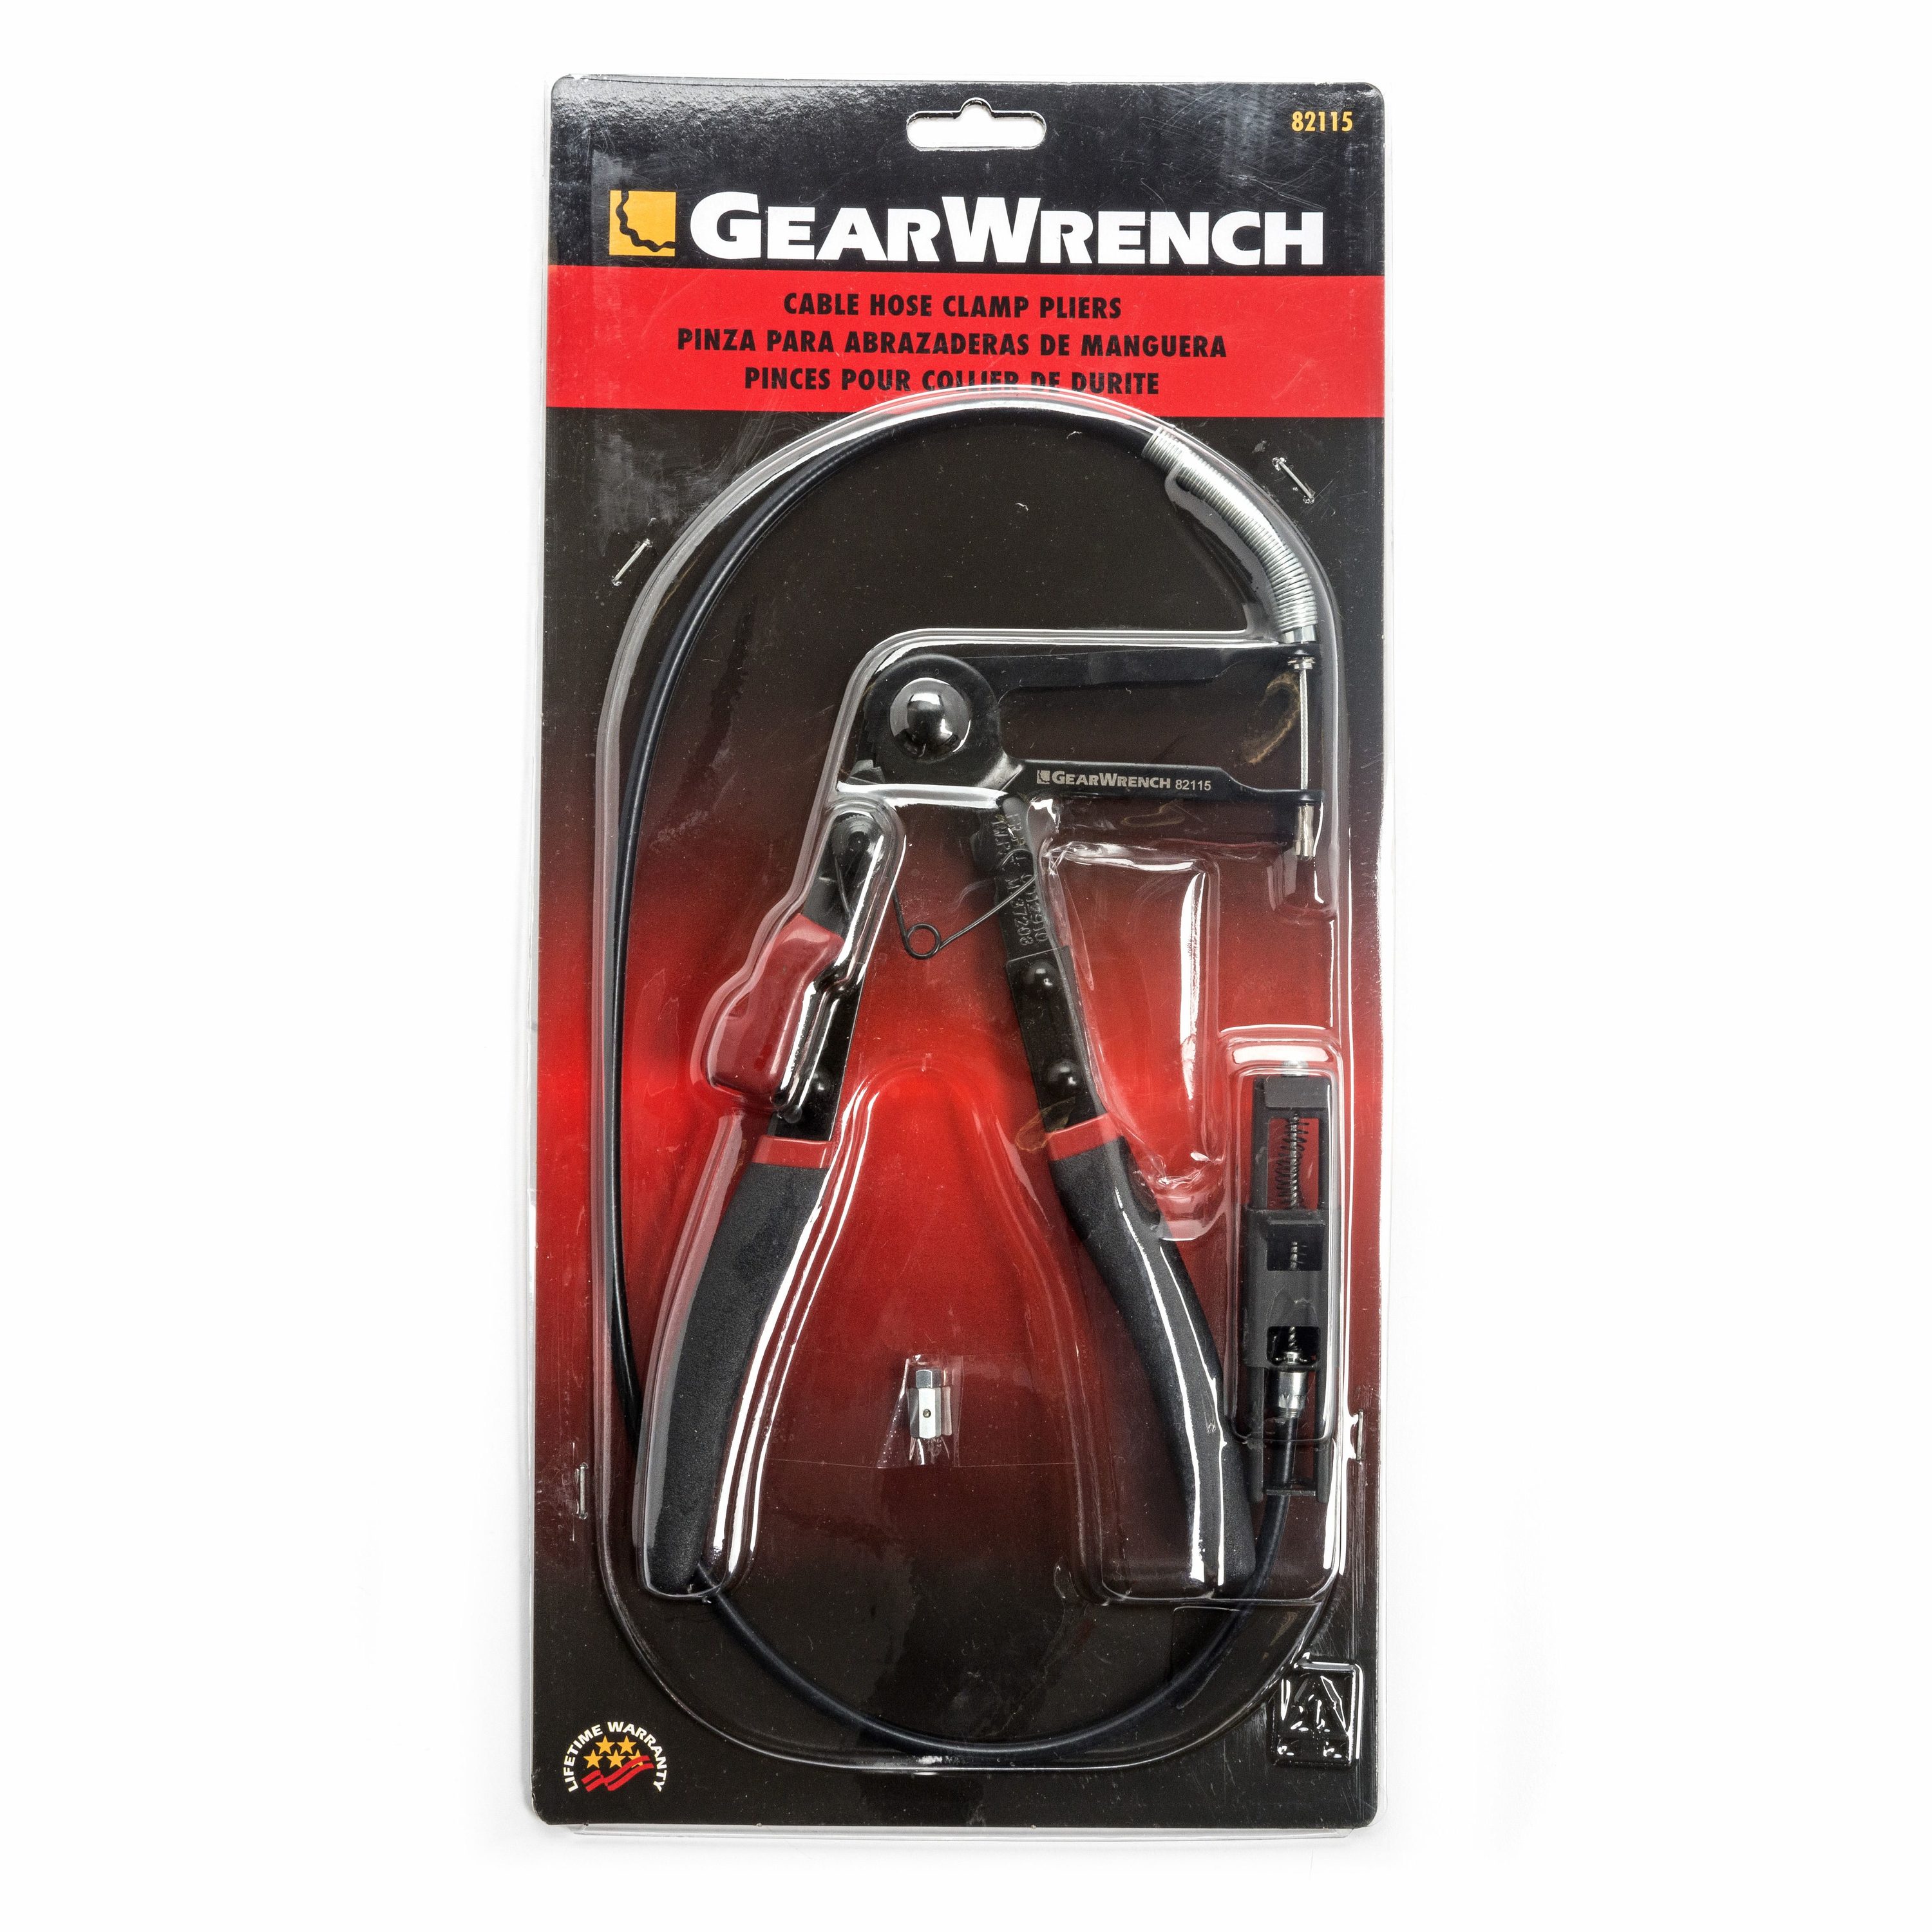 GEARWRENCH Angled Hose Clamp Pliers 3977 - The Home Depot